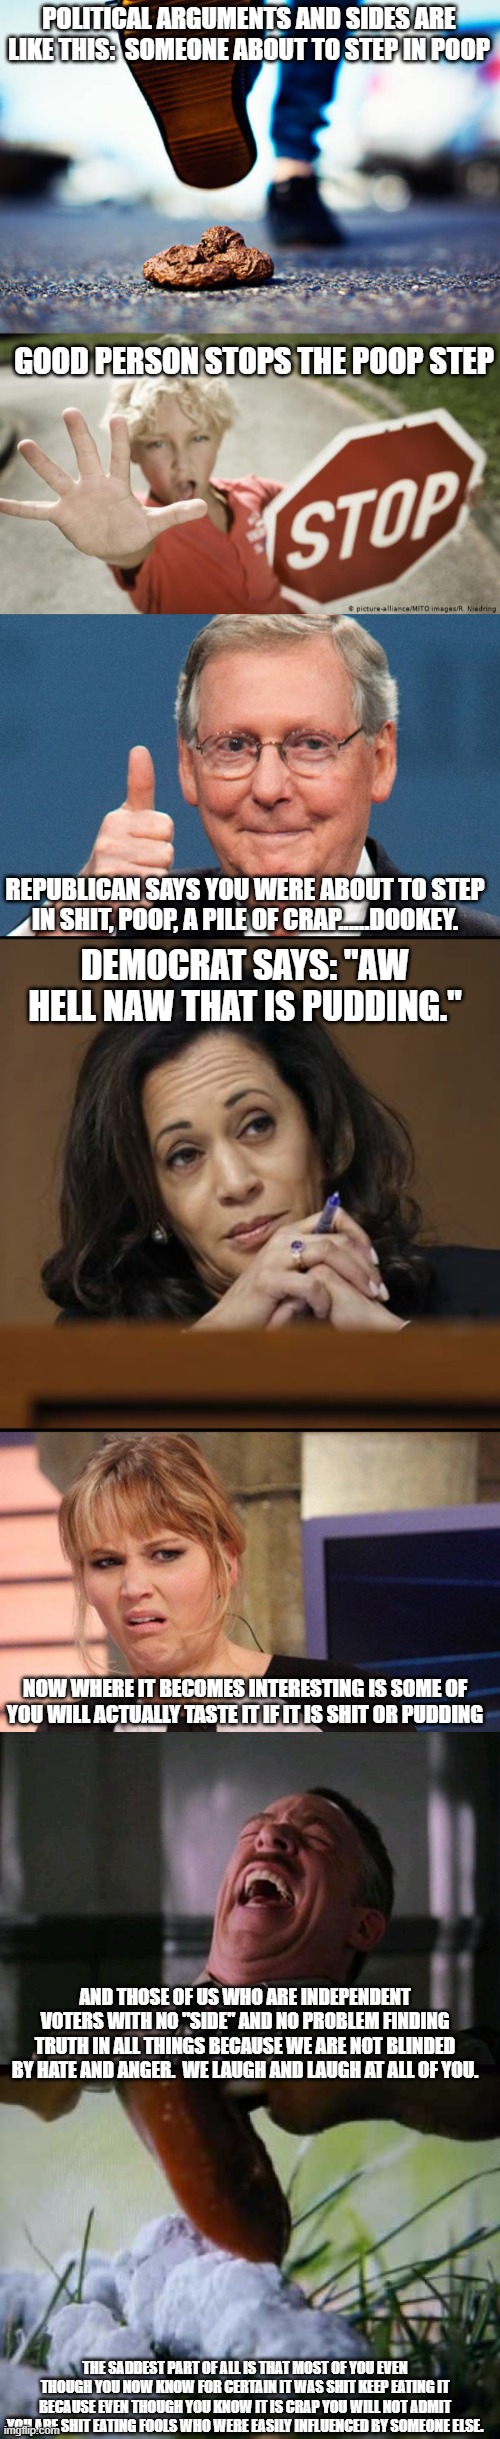 Don't eat shit to spite yourself. | POLITICAL ARGUMENTS AND SIDES ARE LIKE THIS:  SOMEONE ABOUT TO STEP IN POOP; GOOD PERSON STOPS THE POOP STEP; REPUBLICAN SAYS YOU WERE ABOUT TO STEP IN SHIT, POOP, A PILE OF CRAP......DOOKEY. DEMOCRAT SAYS: "AW HELL NAW THAT IS PUDDING."; NOW WHERE IT BECOMES INTERESTING IS SOME OF YOU WILL ACTUALLY TASTE IT IF IT IS SHIT OR PUDDING; AND THOSE OF US WHO ARE INDEPENDENT VOTERS WITH NO "SIDE" AND NO PROBLEM FINDING TRUTH IN ALL THINGS BECAUSE WE ARE NOT BLINDED BY HATE AND ANGER.  WE LAUGH AND LAUGH AT ALL OF YOU. THE SADDEST PART OF ALL IS THAT MOST OF YOU EVEN THOUGH YOU NOW KNOW FOR CERTAIN IT WAS SHIT KEEP EATING IT BECAUSE EVEN THOUGH YOU KNOW IT IS CRAP YOU WILL NOT ADMIT YOU ARE SHIT EATING FOOLS WHO WERE EASILY INFLUENCED BY SOMEONE ELSE. | image tagged in trump republicans and guns,kamala harris,grossed out,rofl | made w/ Imgflip meme maker